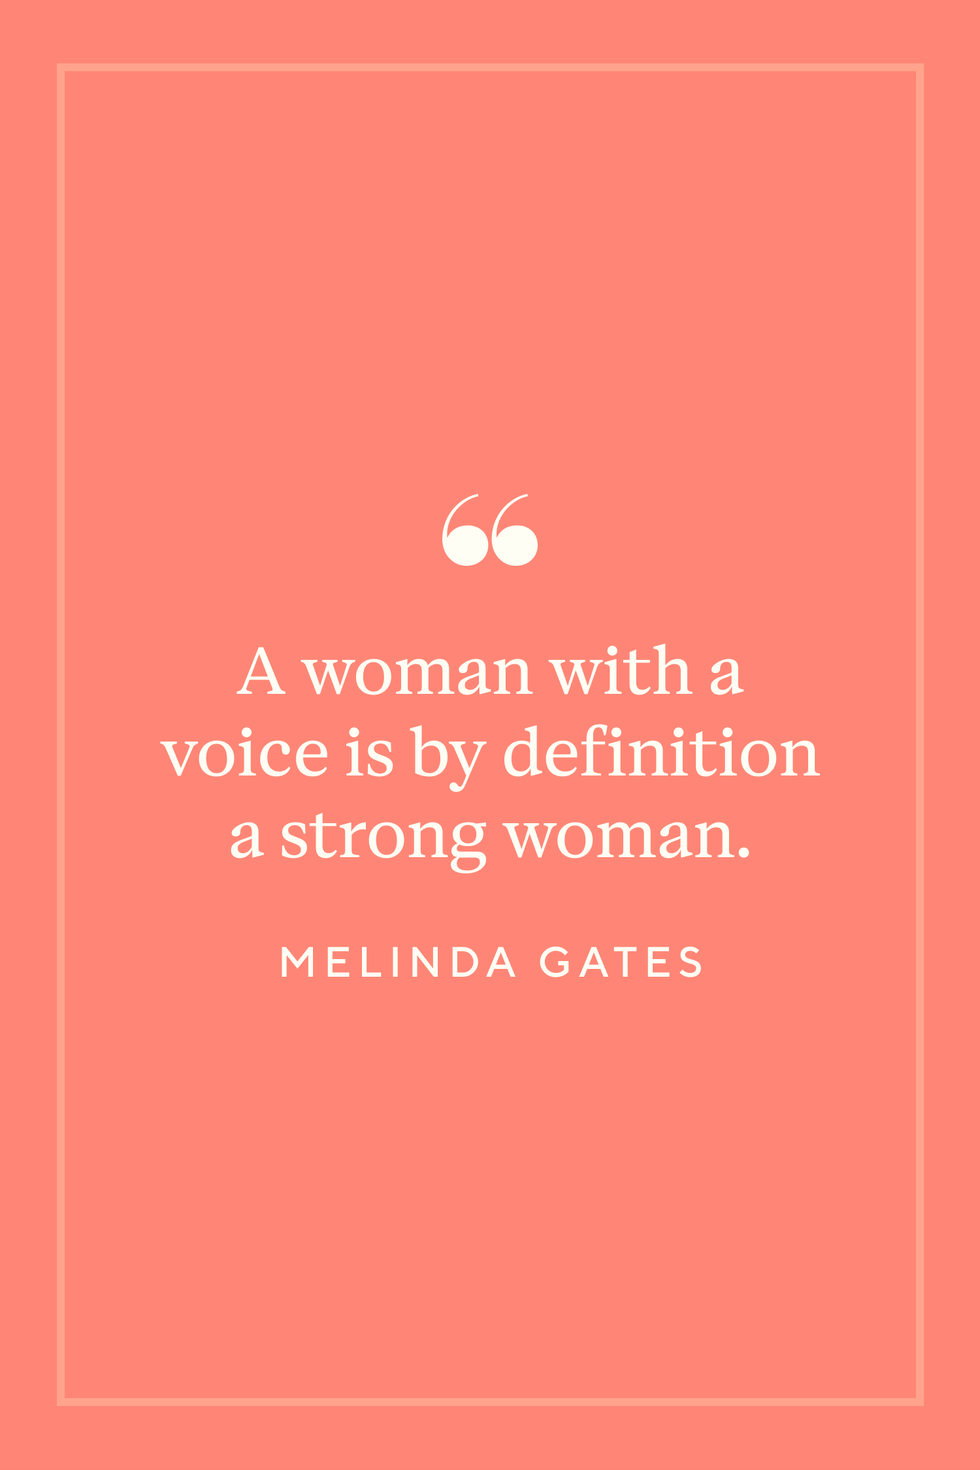 TOP 25 EMPOWERING WOMEN QUOTES (of 334)